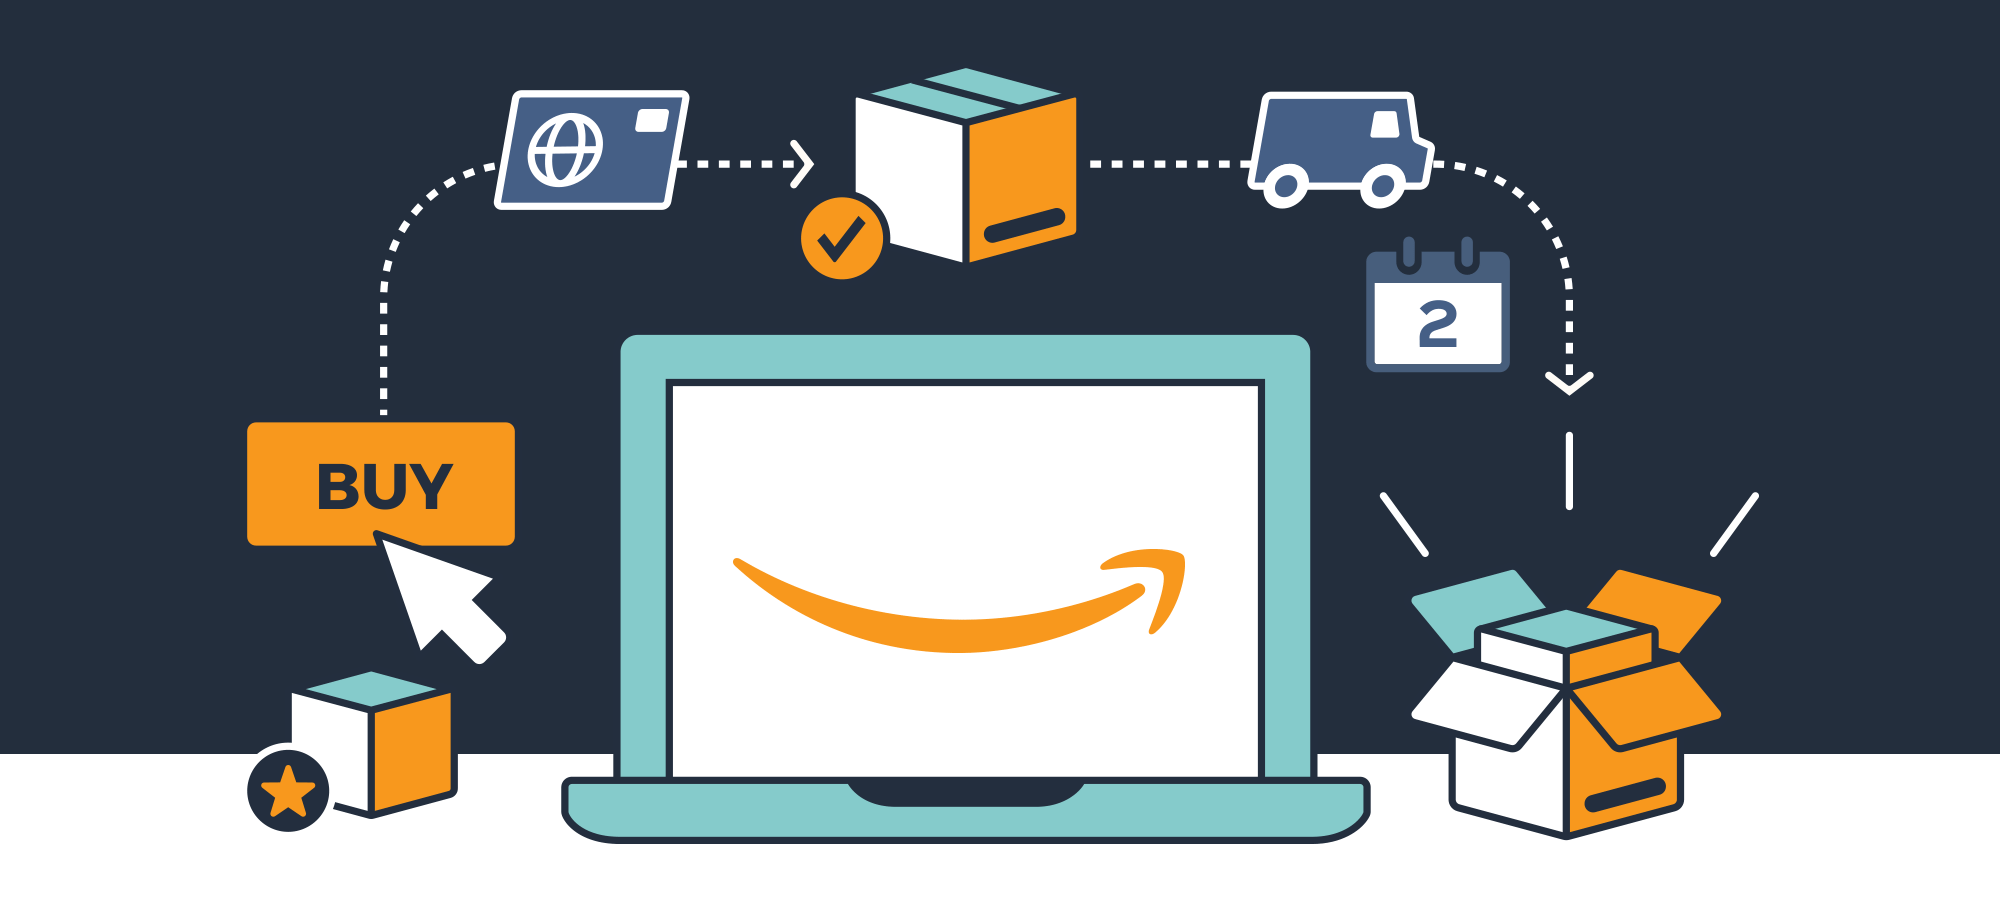 How to sell on Amazon?